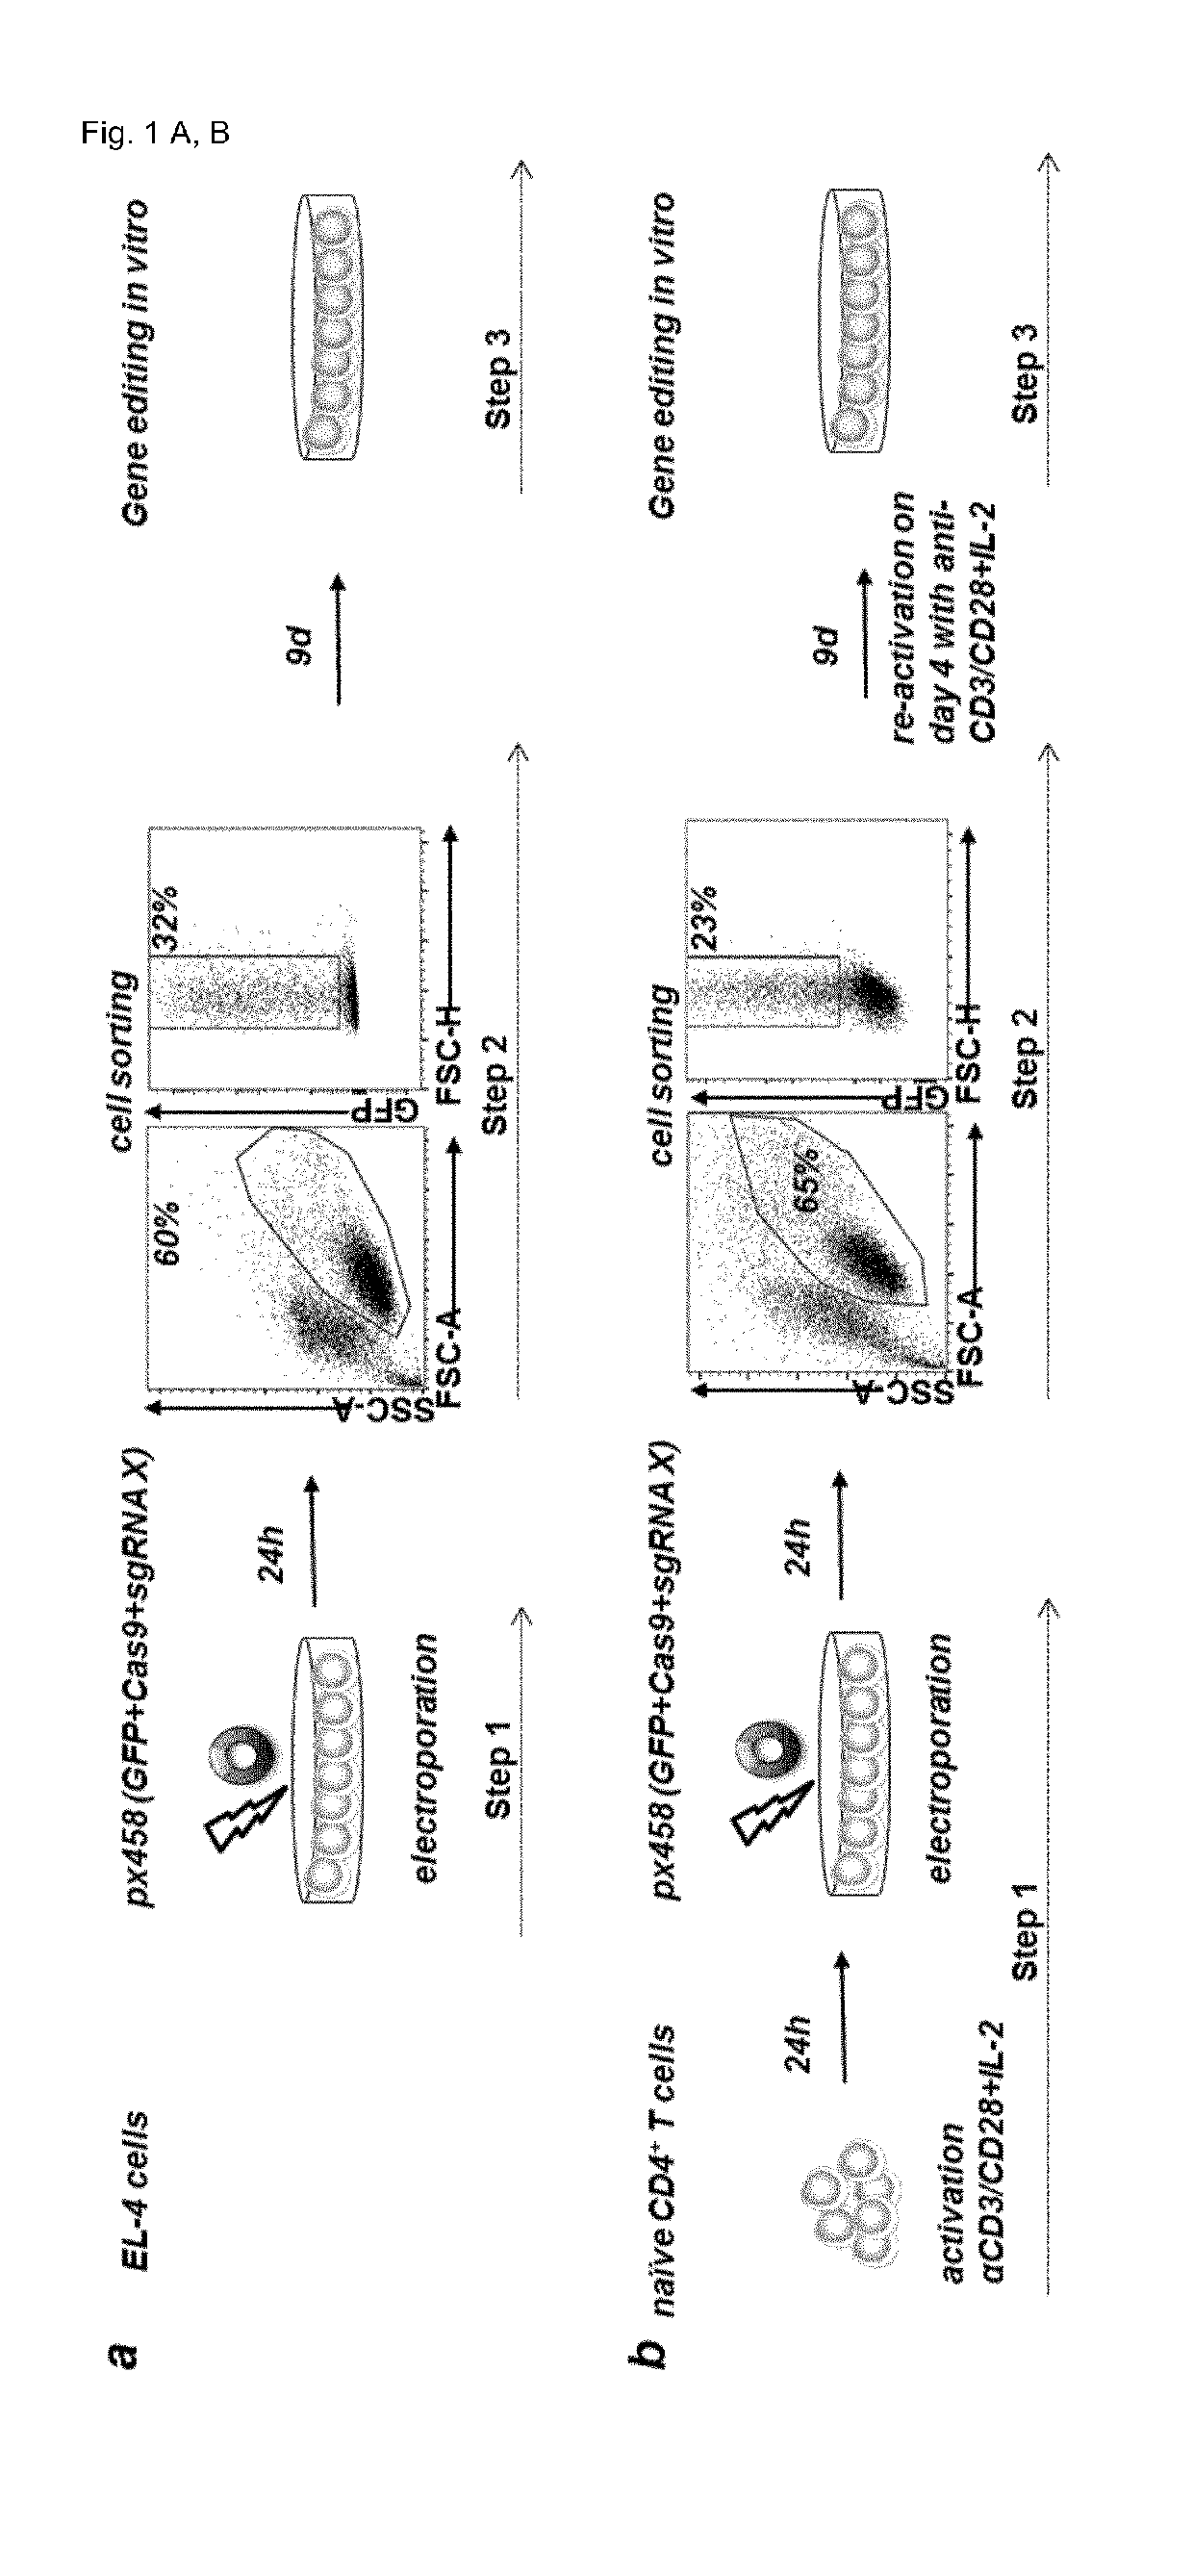 Allele editing and applications thereof